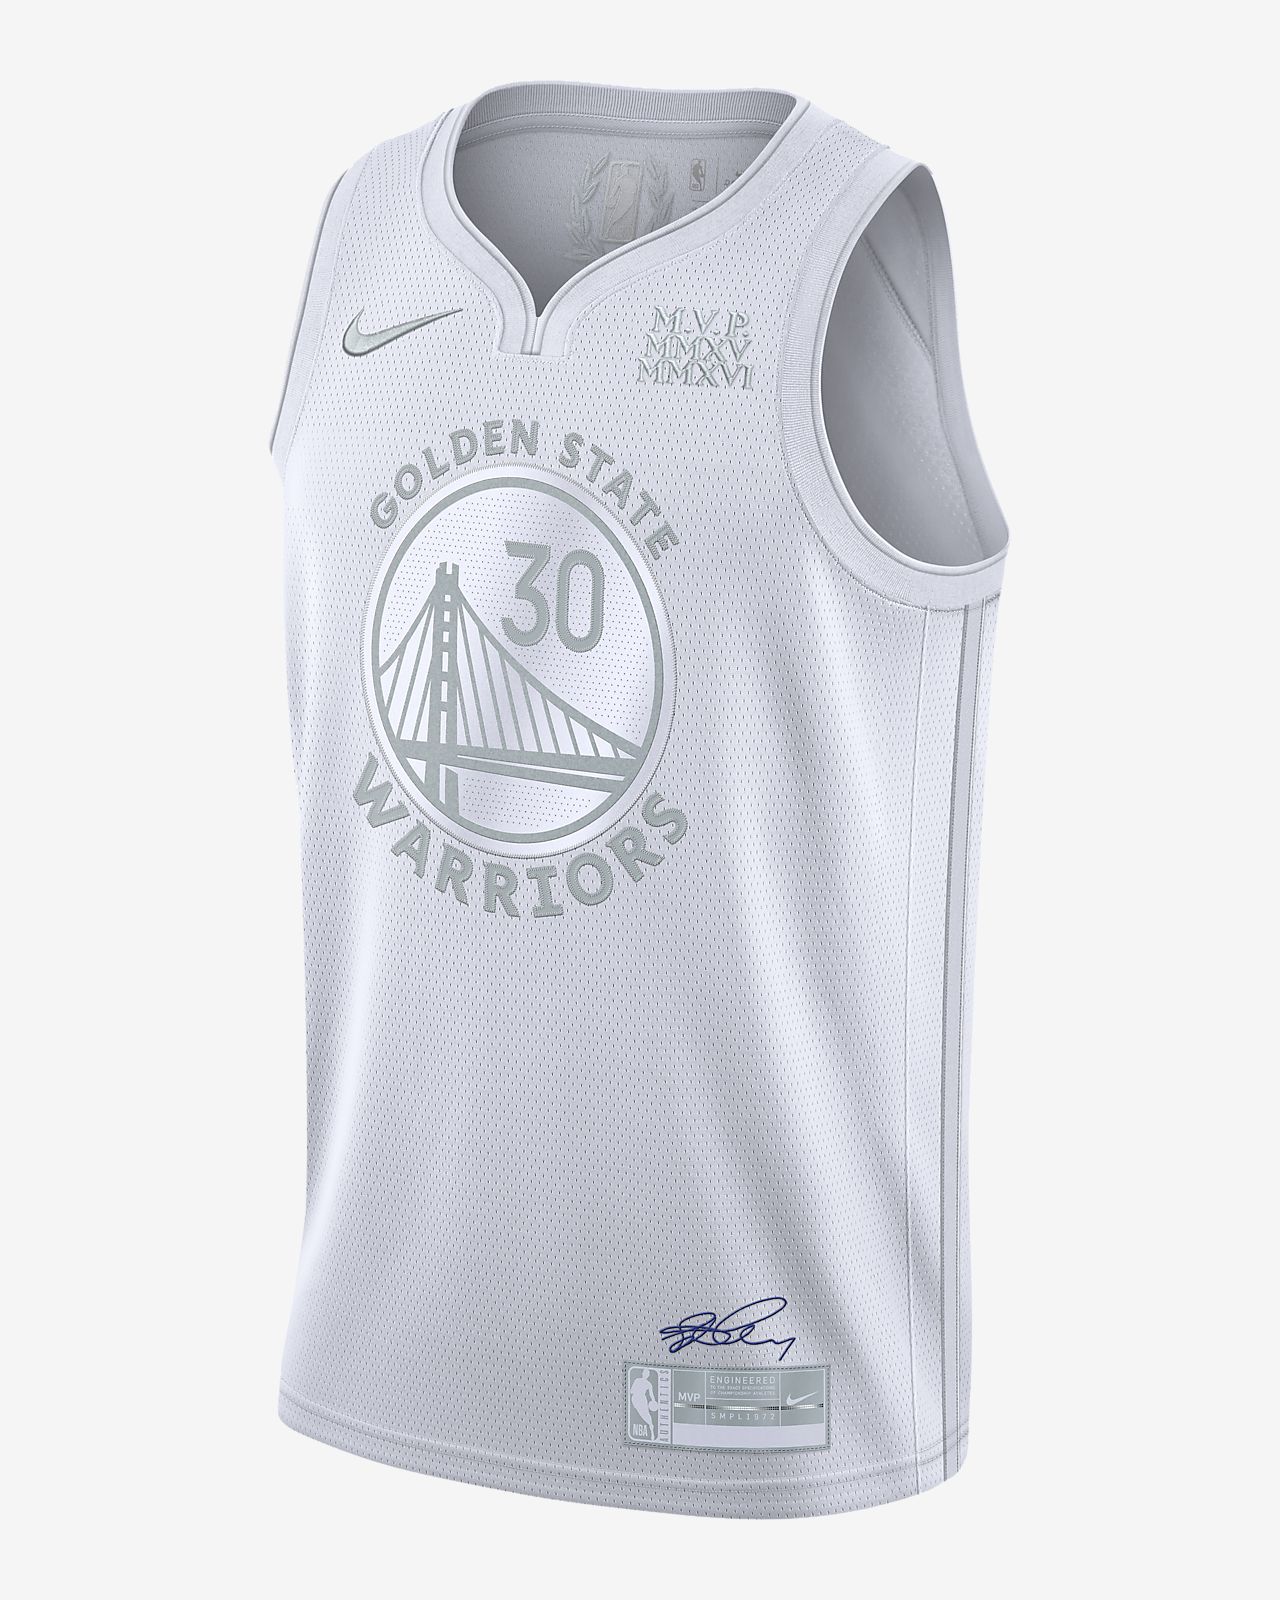 steph curry men's jersey